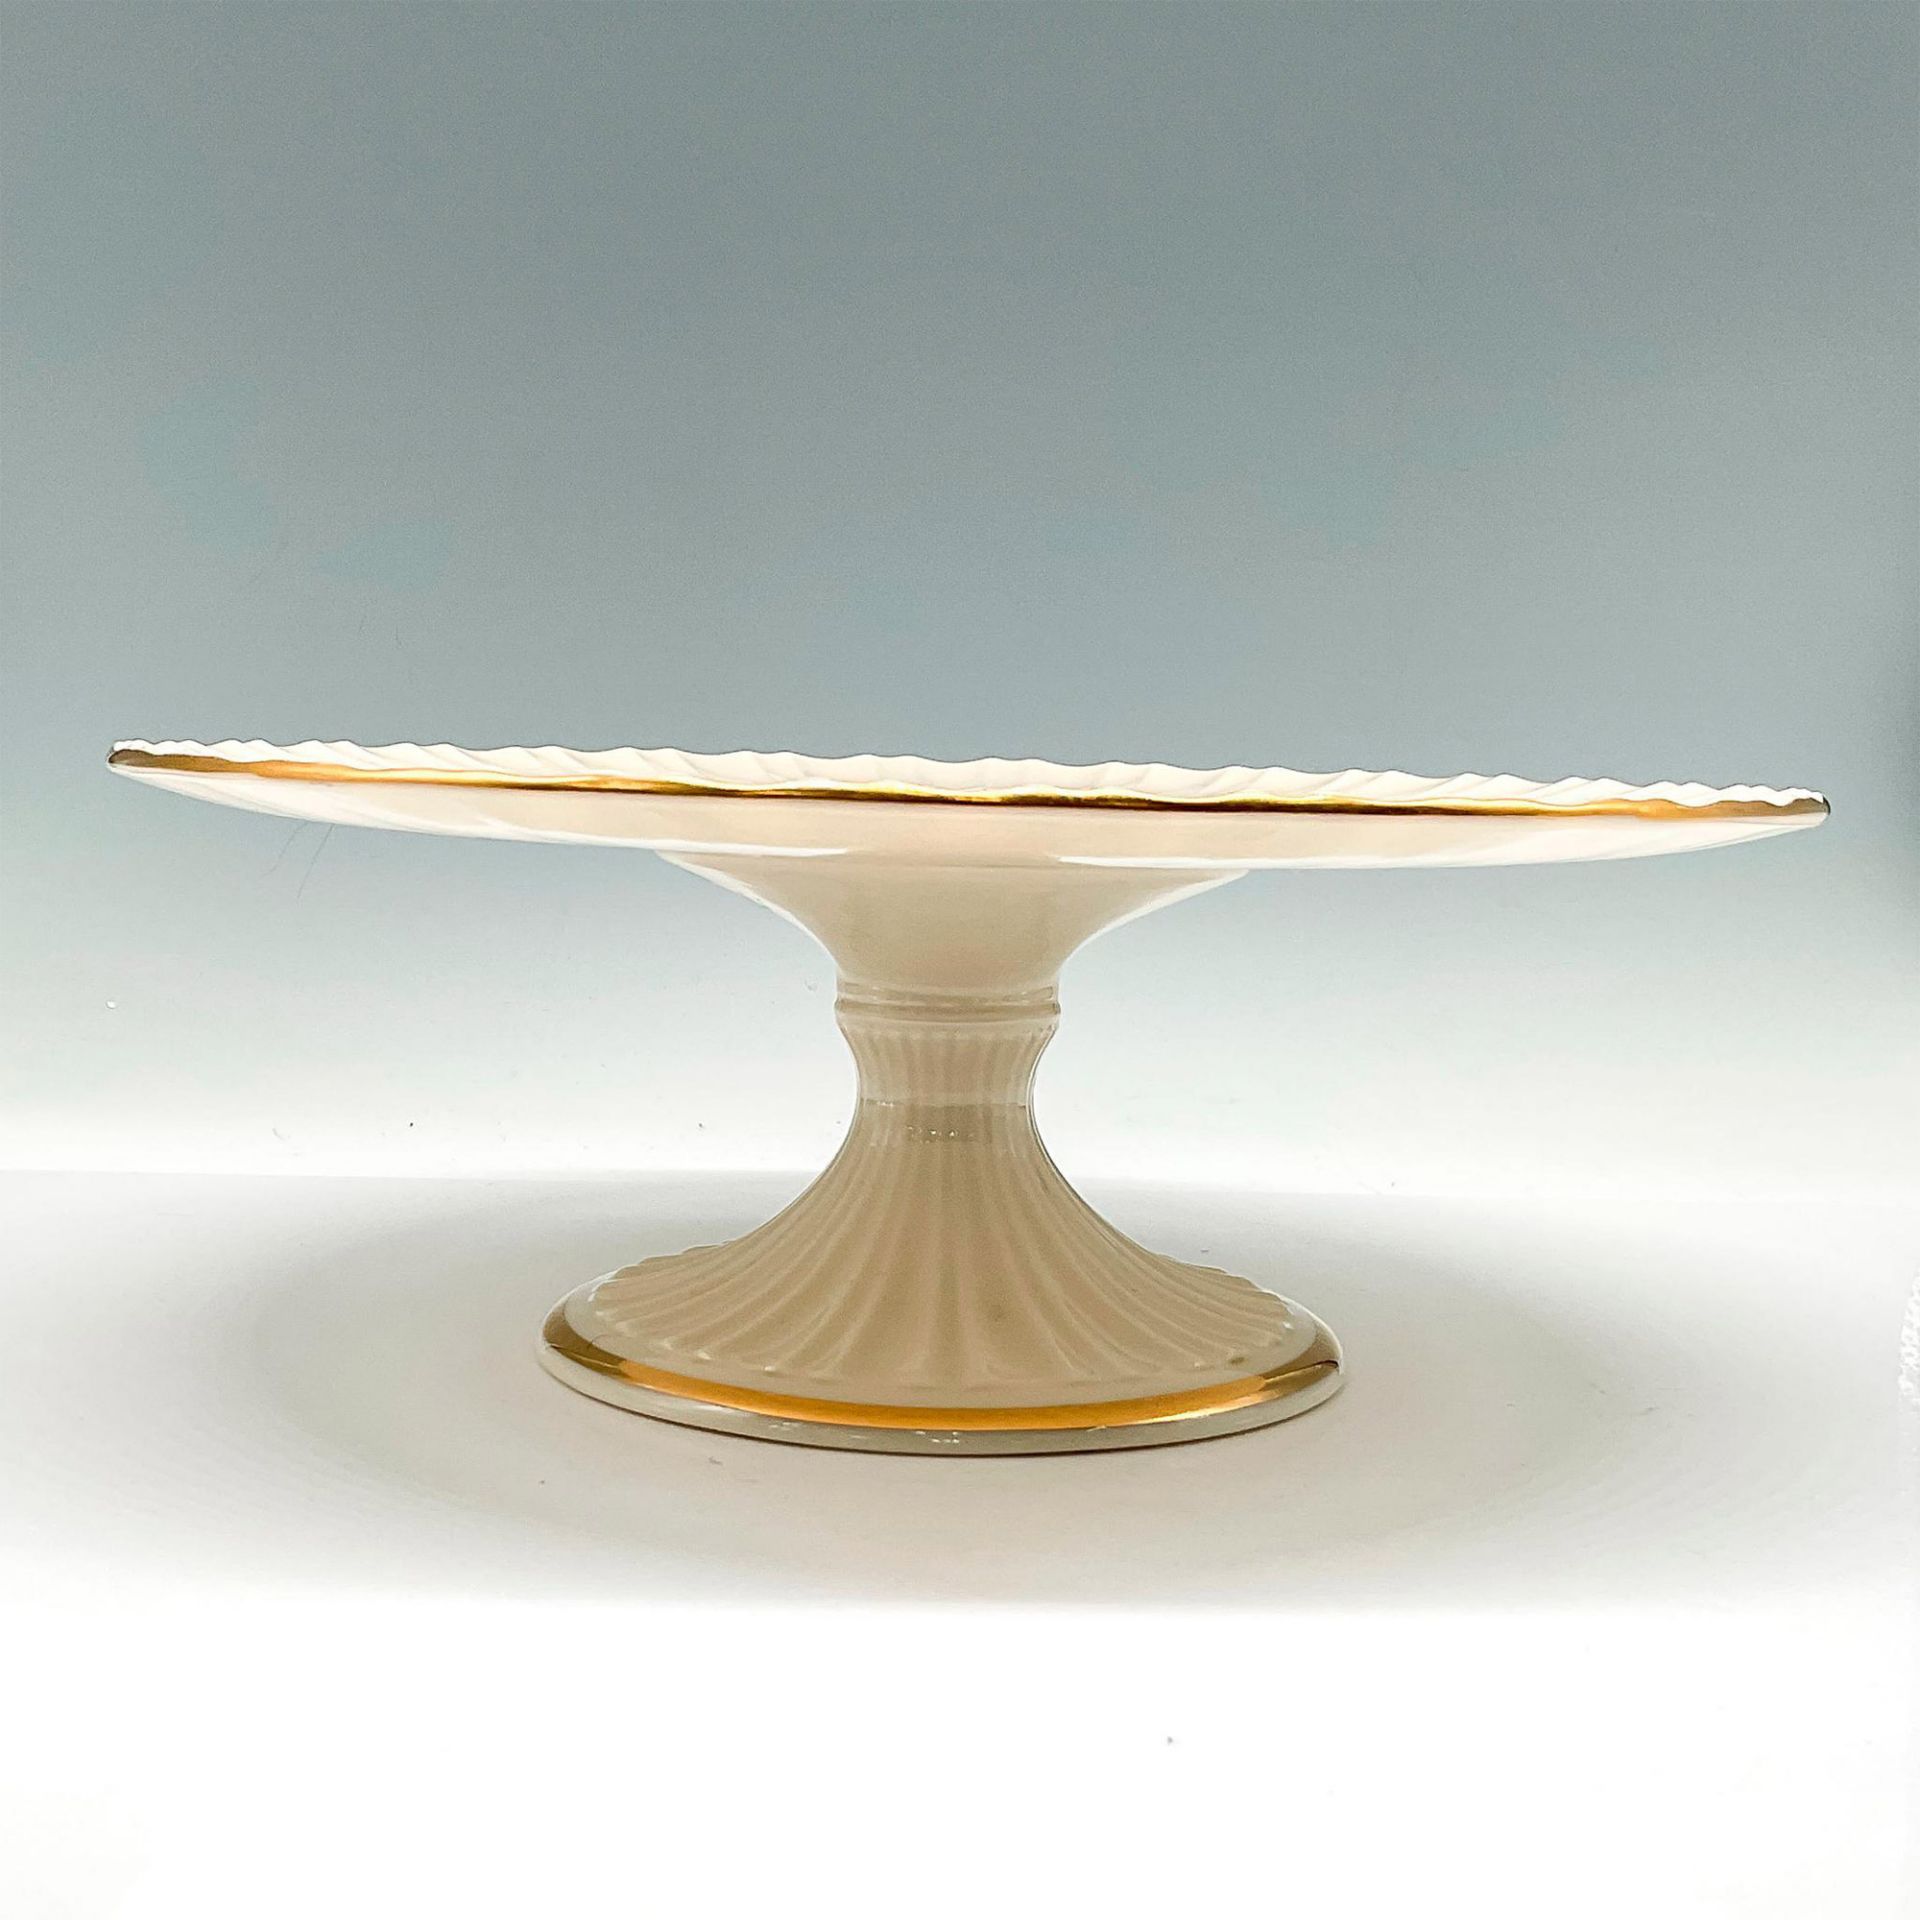 Lenox Bone China Cake Stand with 24Kt Gold Accents - Image 2 of 3